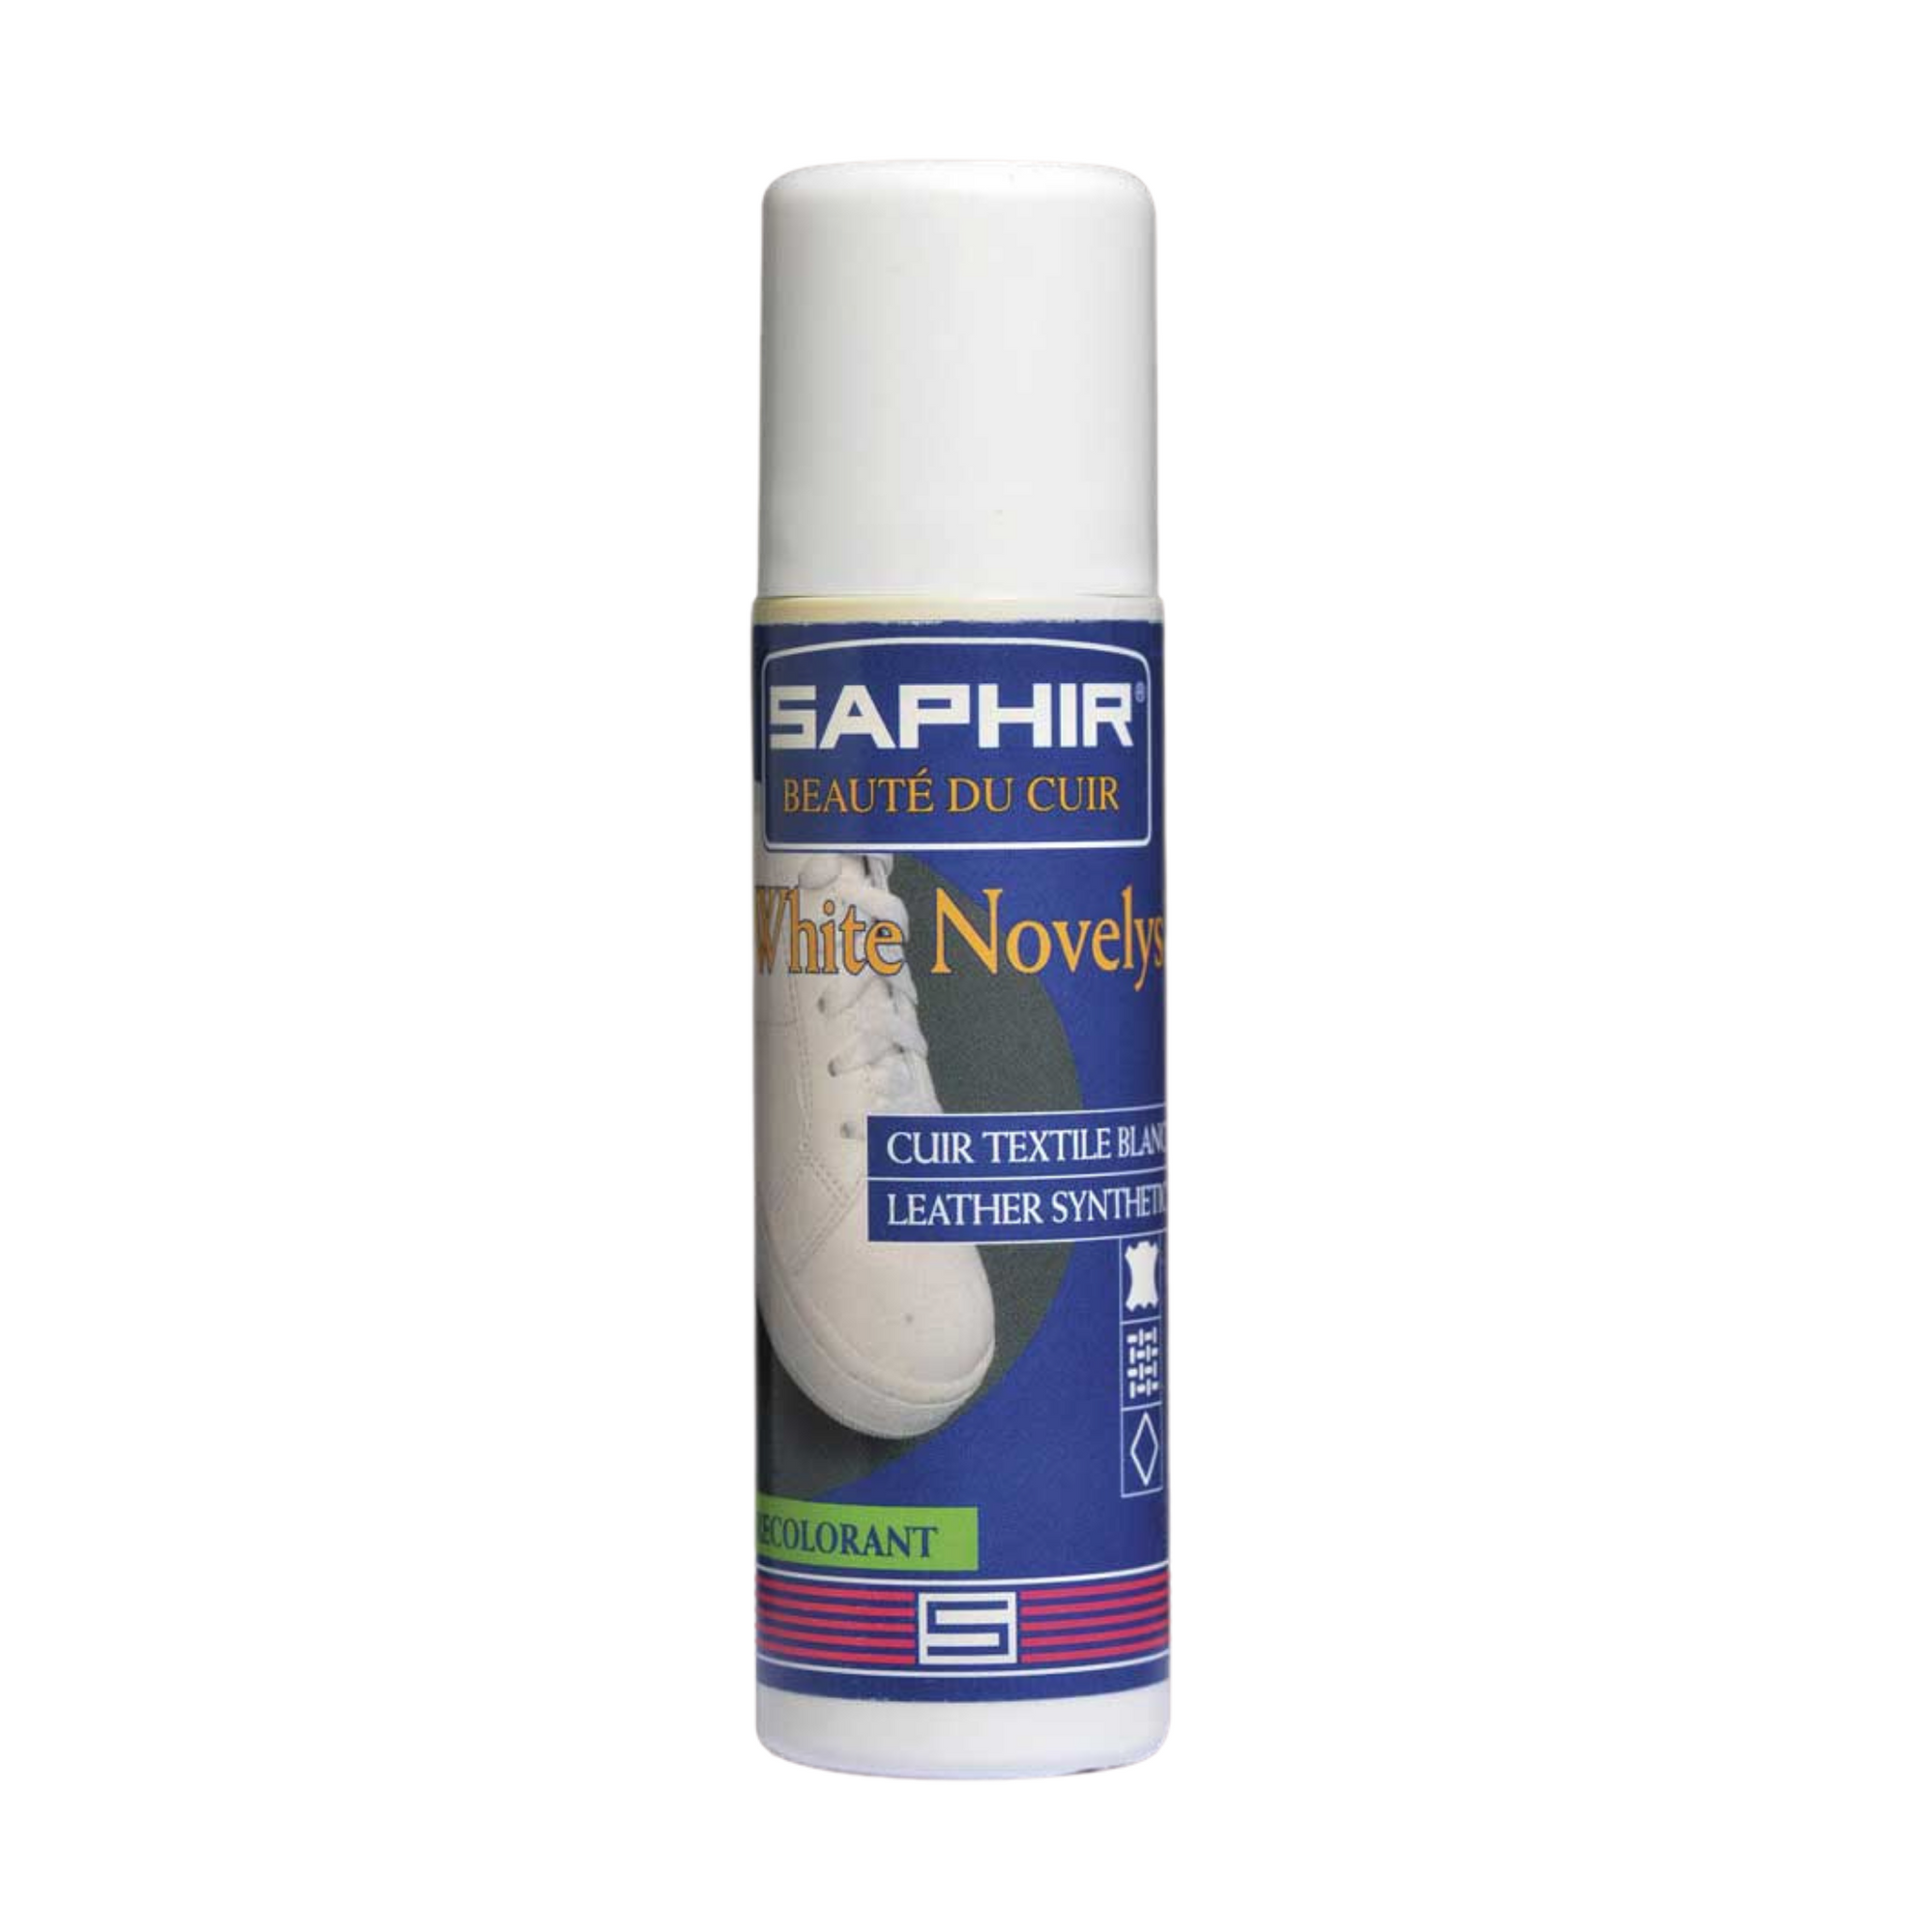 Saphir White Novelys. Shoe cleaner for your white shoes including sneakers, golf shoes, etc. Stocked in Australia